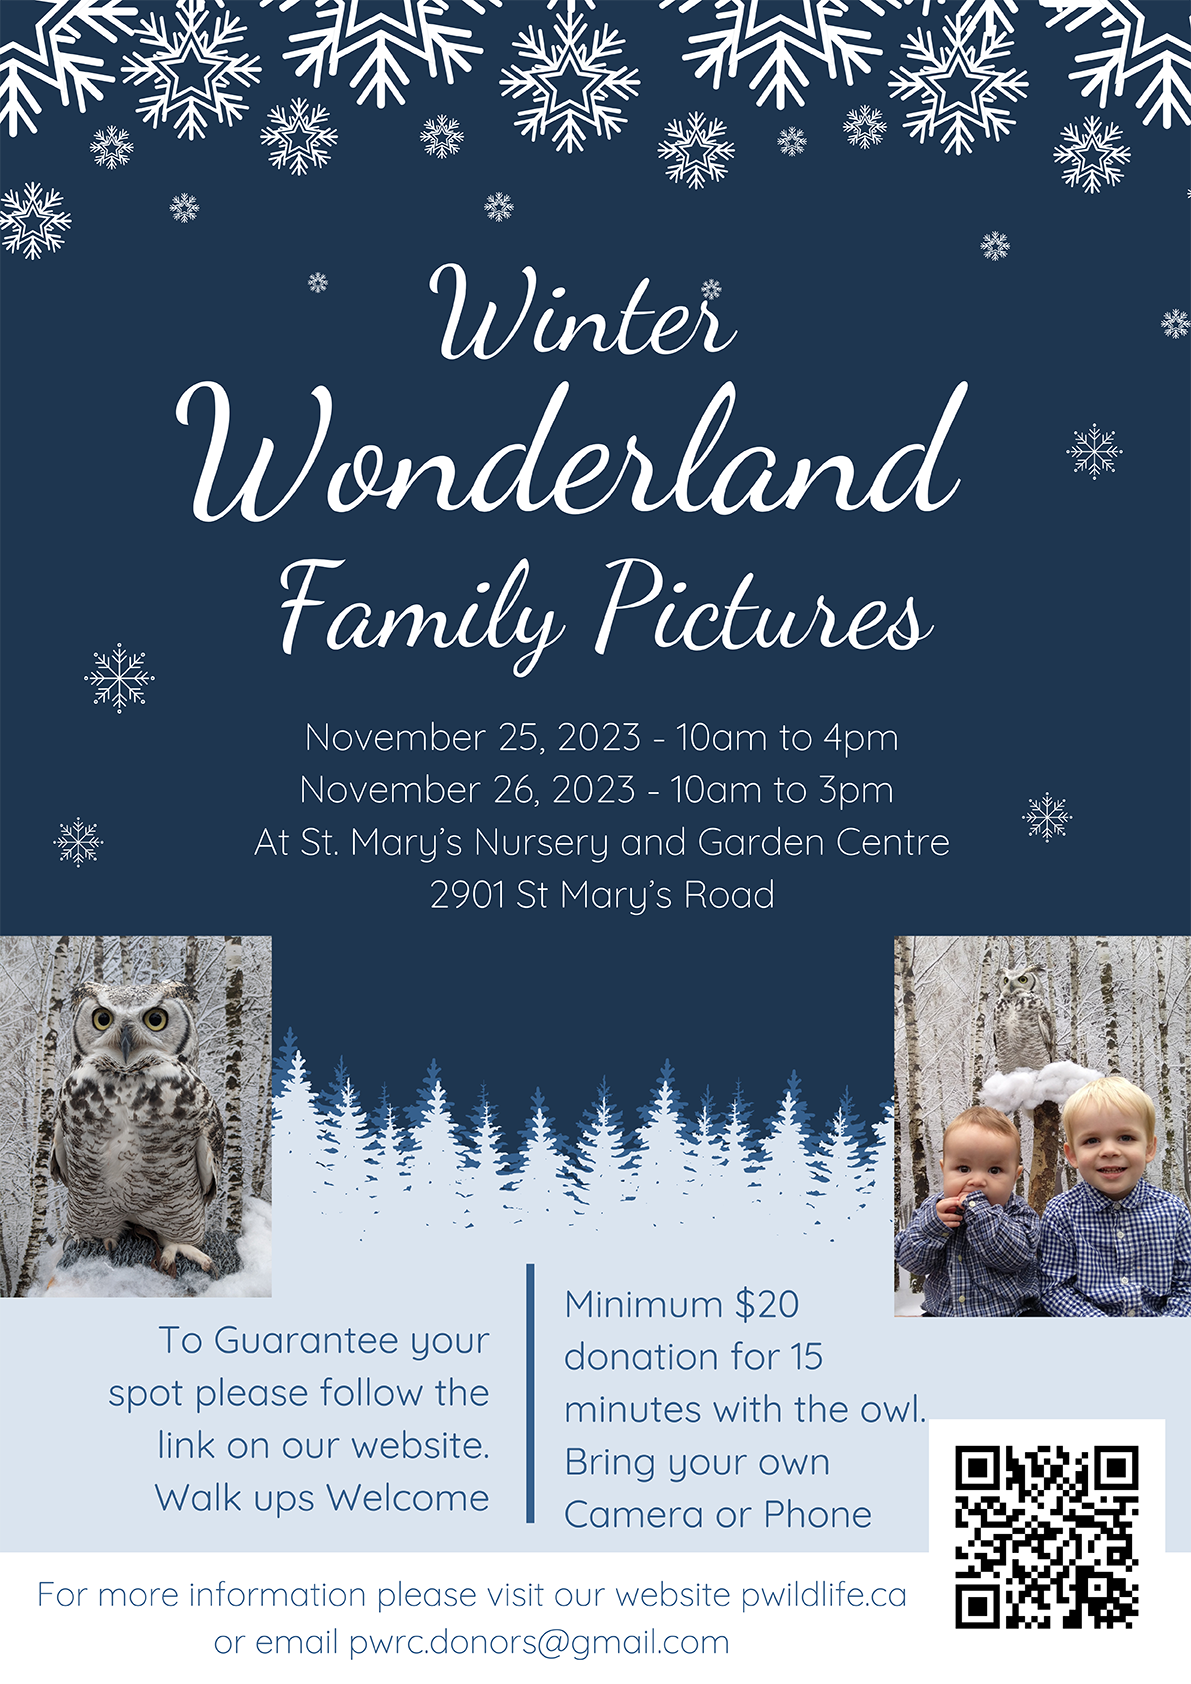 Winter Wonderland Family Pictures